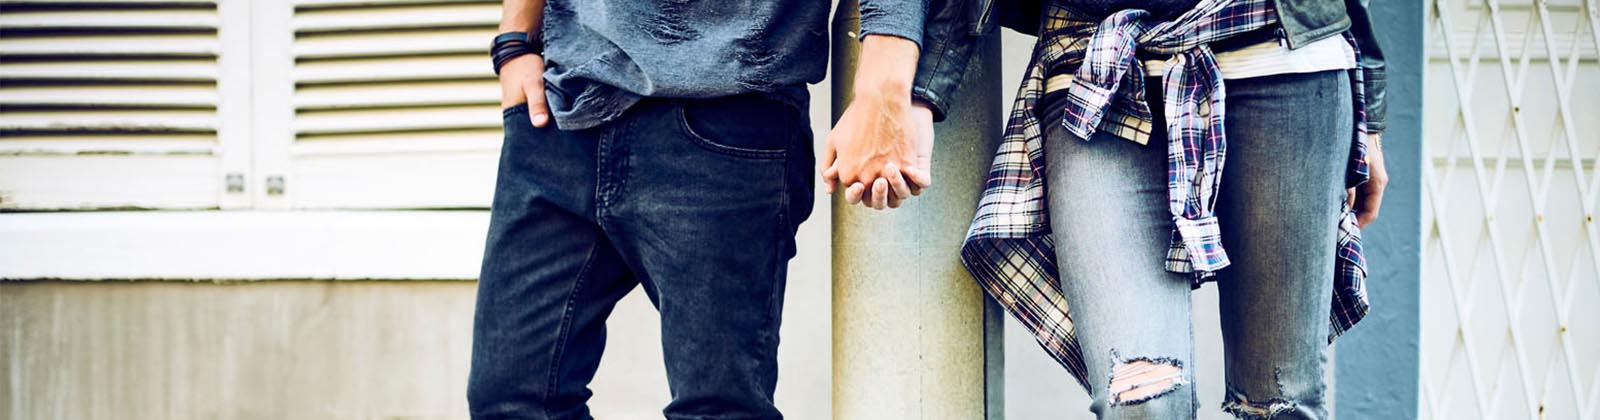 couple holding hands on the street